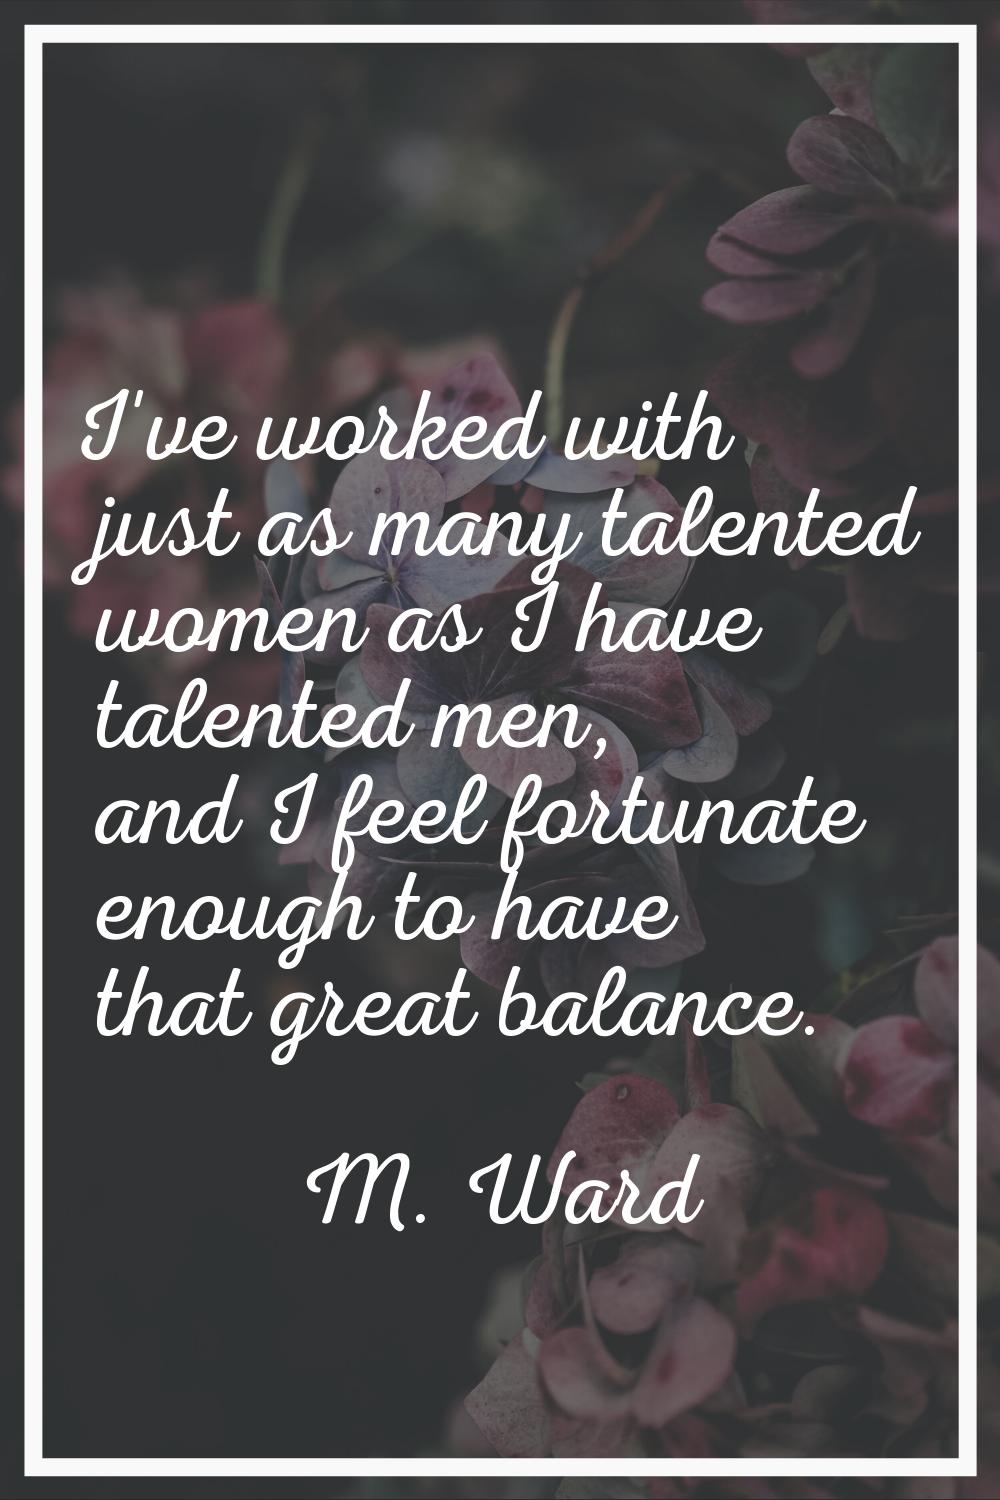 I've worked with just as many talented women as I have talented men, and I feel fortunate enough to